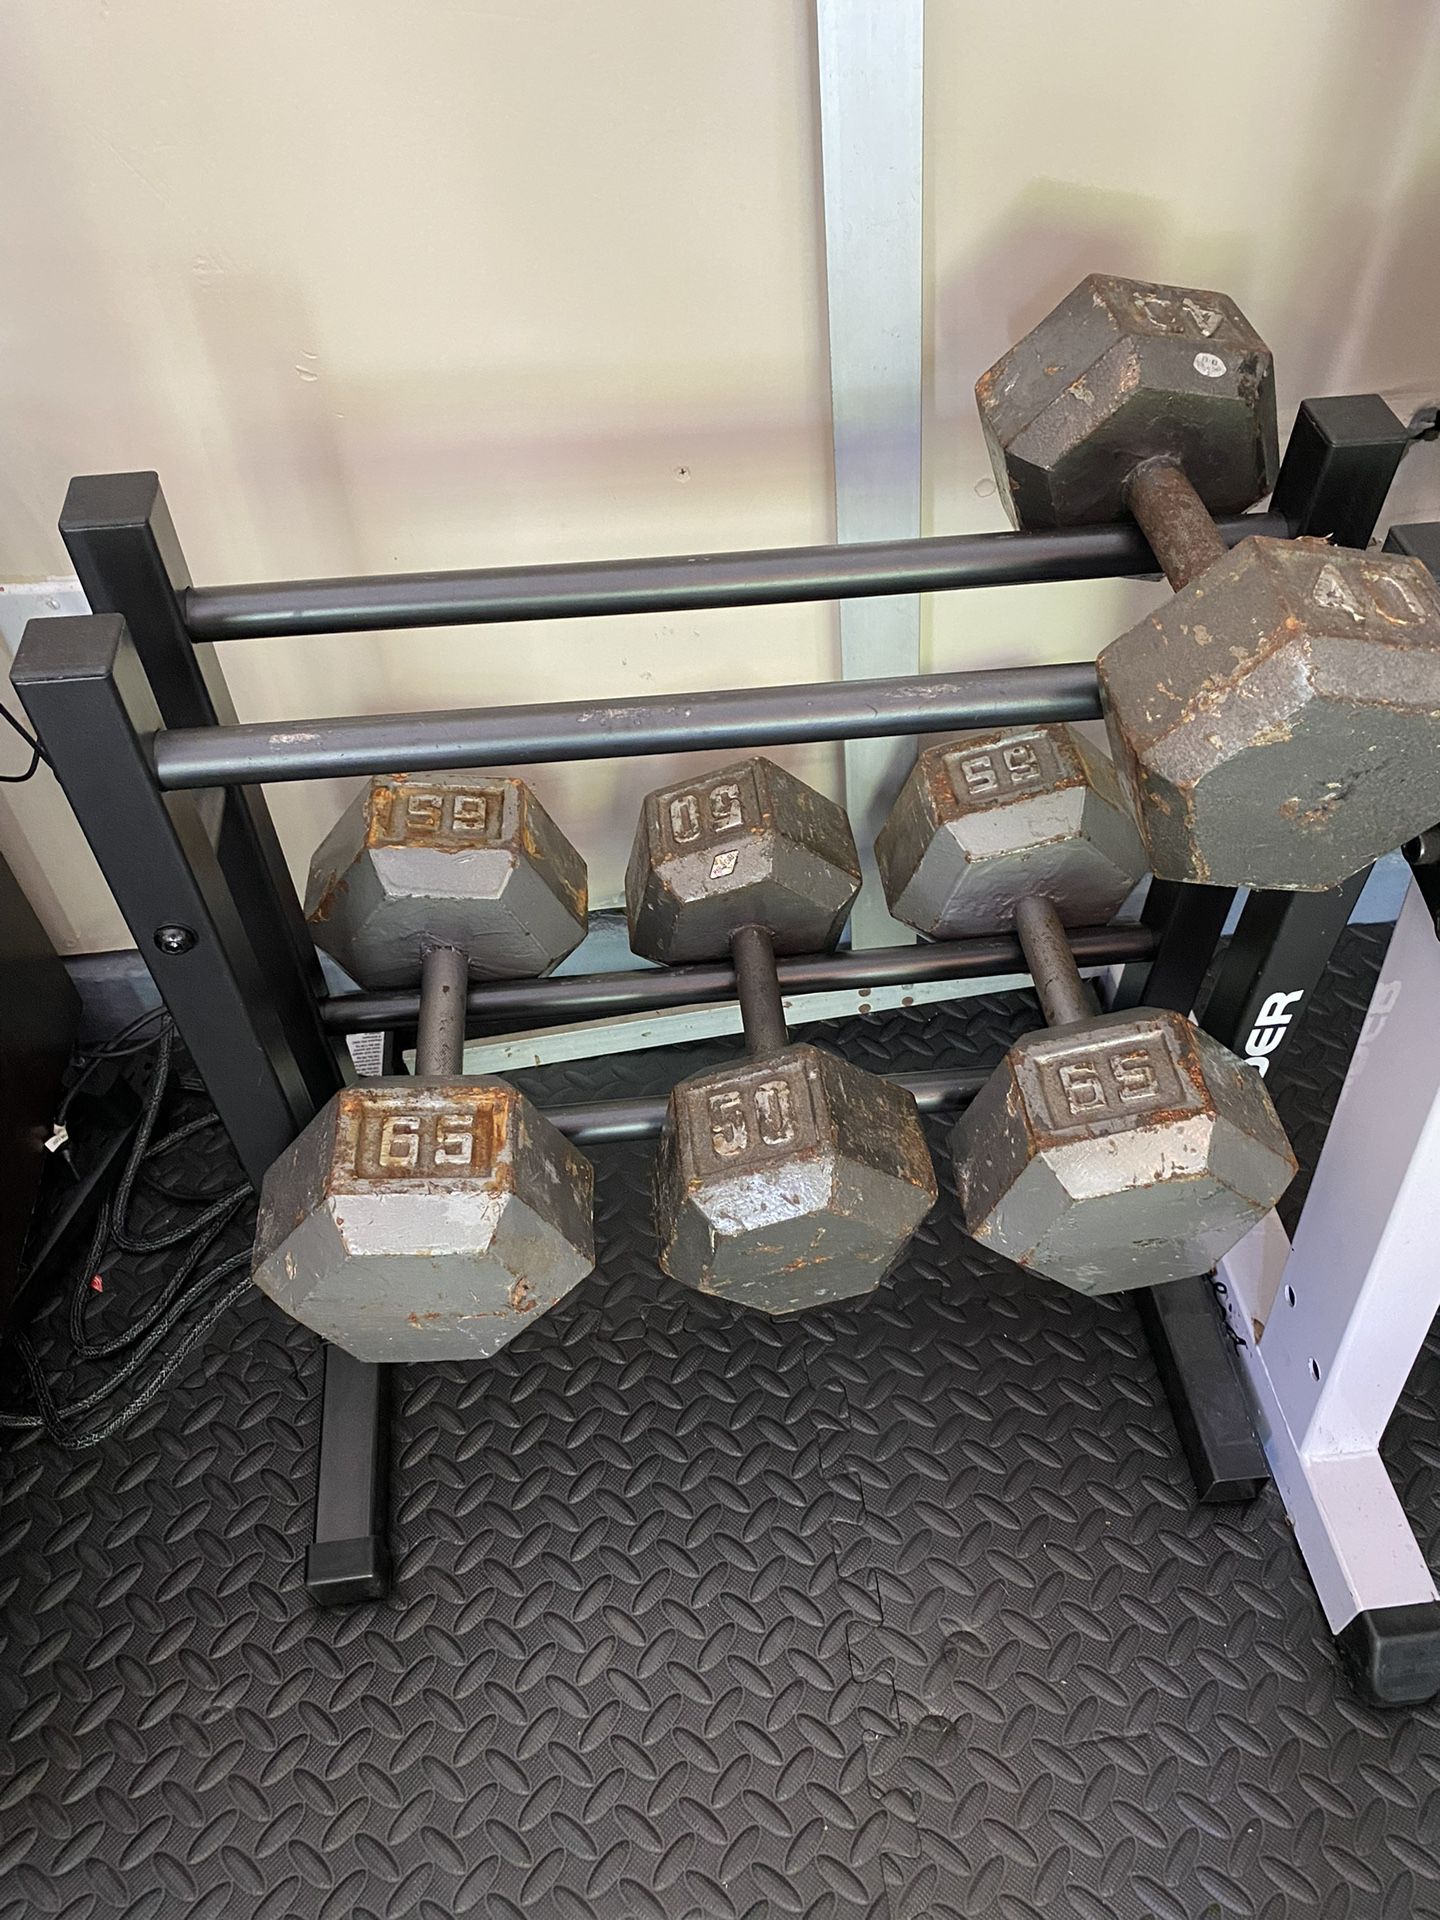 Dumbbells With Rack 